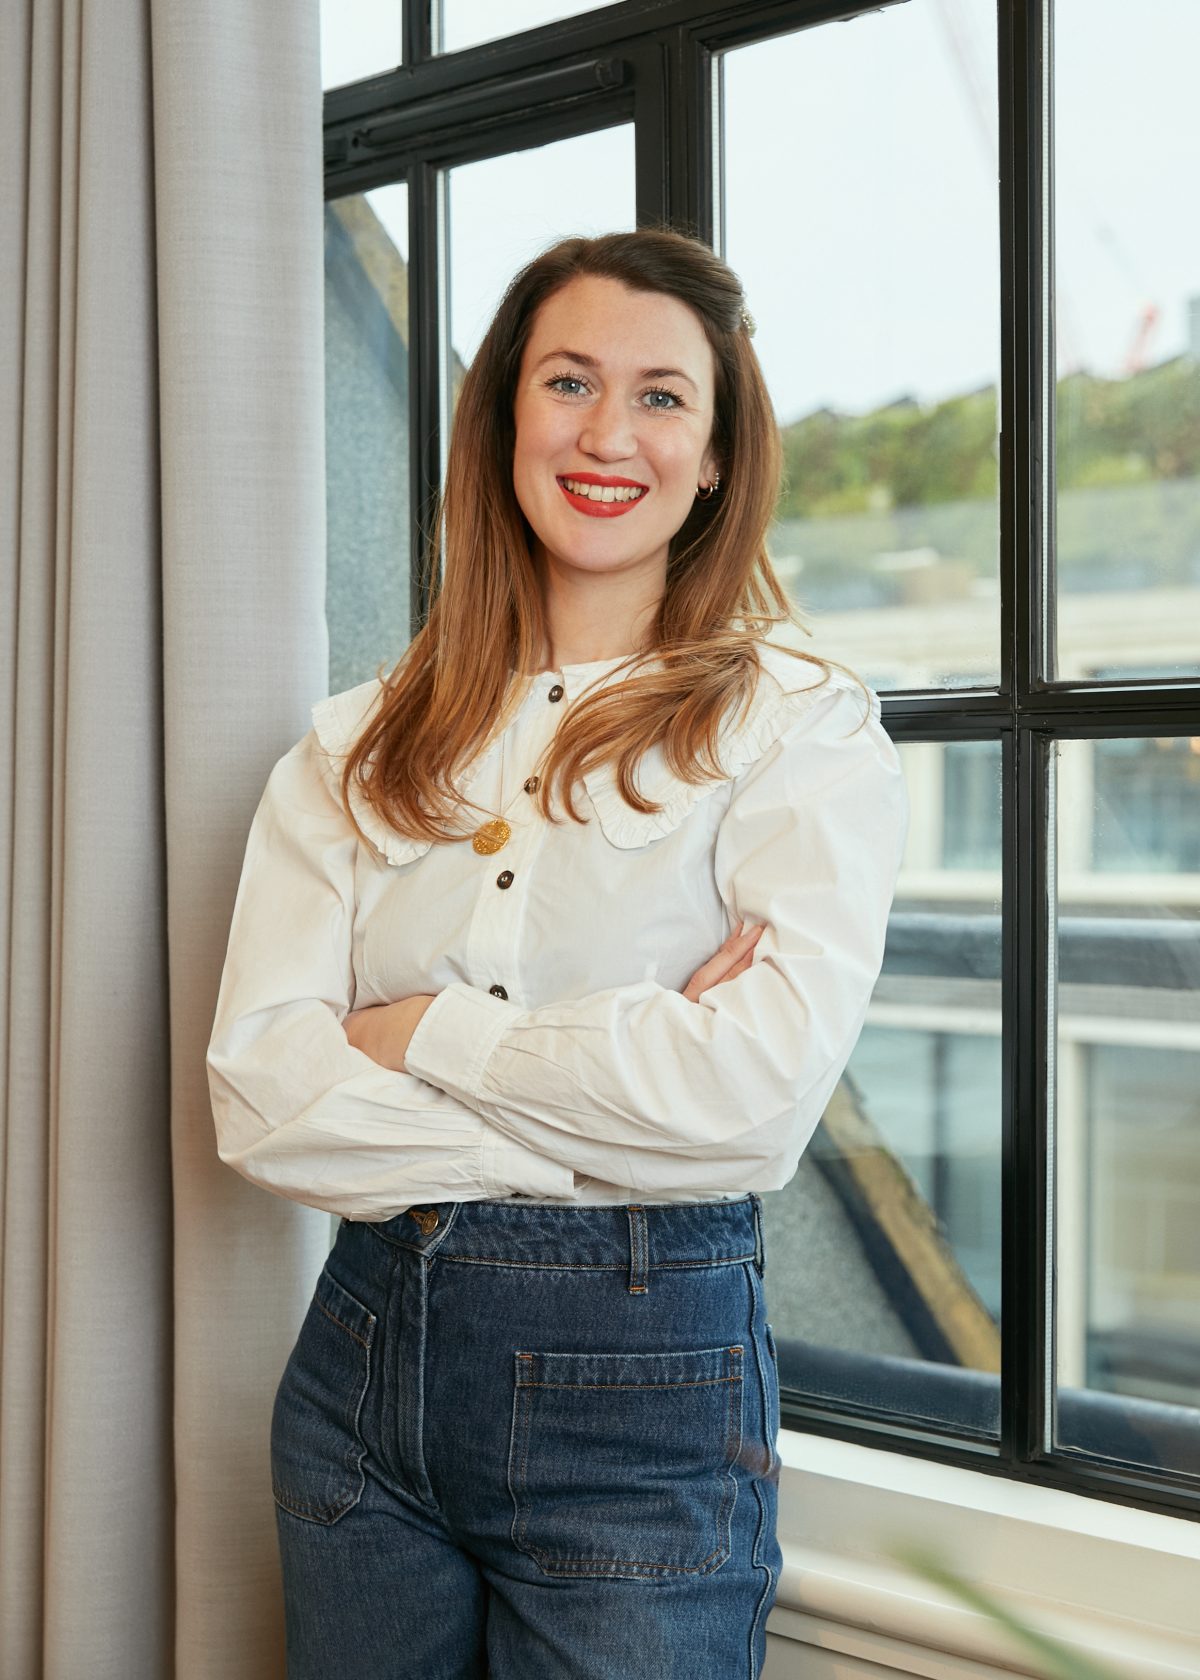 About Time You Met: Joanna Payne, Founder of Marguerite - About Time ...